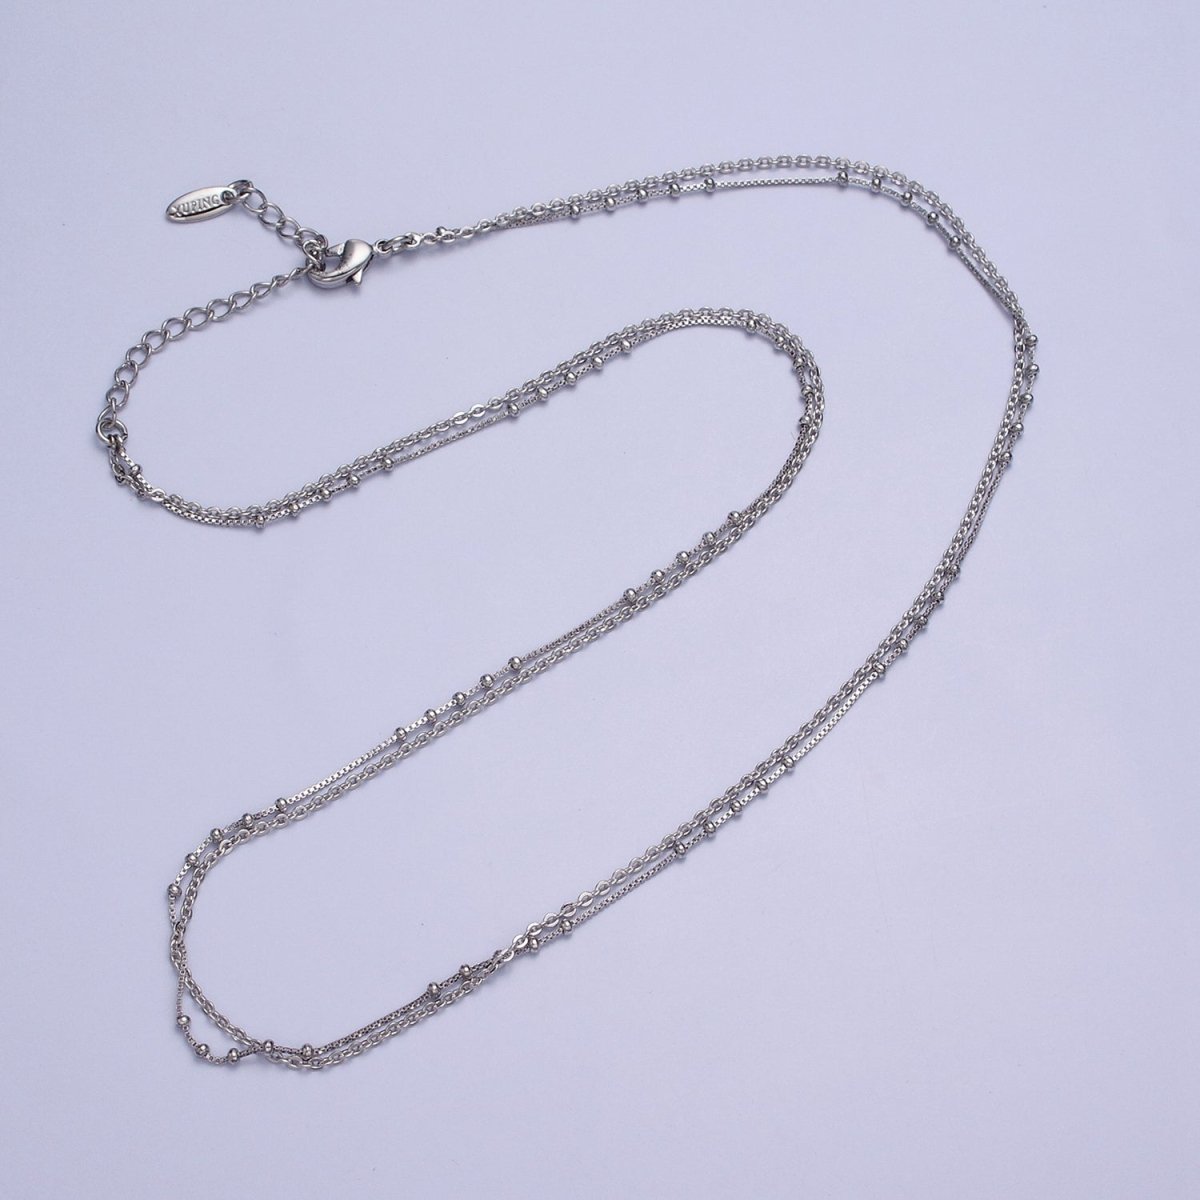 Double Layer Silver Necklace Set Two Strand Chain Multi Strand Necklace Satellite Chain and Cable Link Chain Necklace For Minimalist | WA-1606 Clearance Pricing - DLUXCA